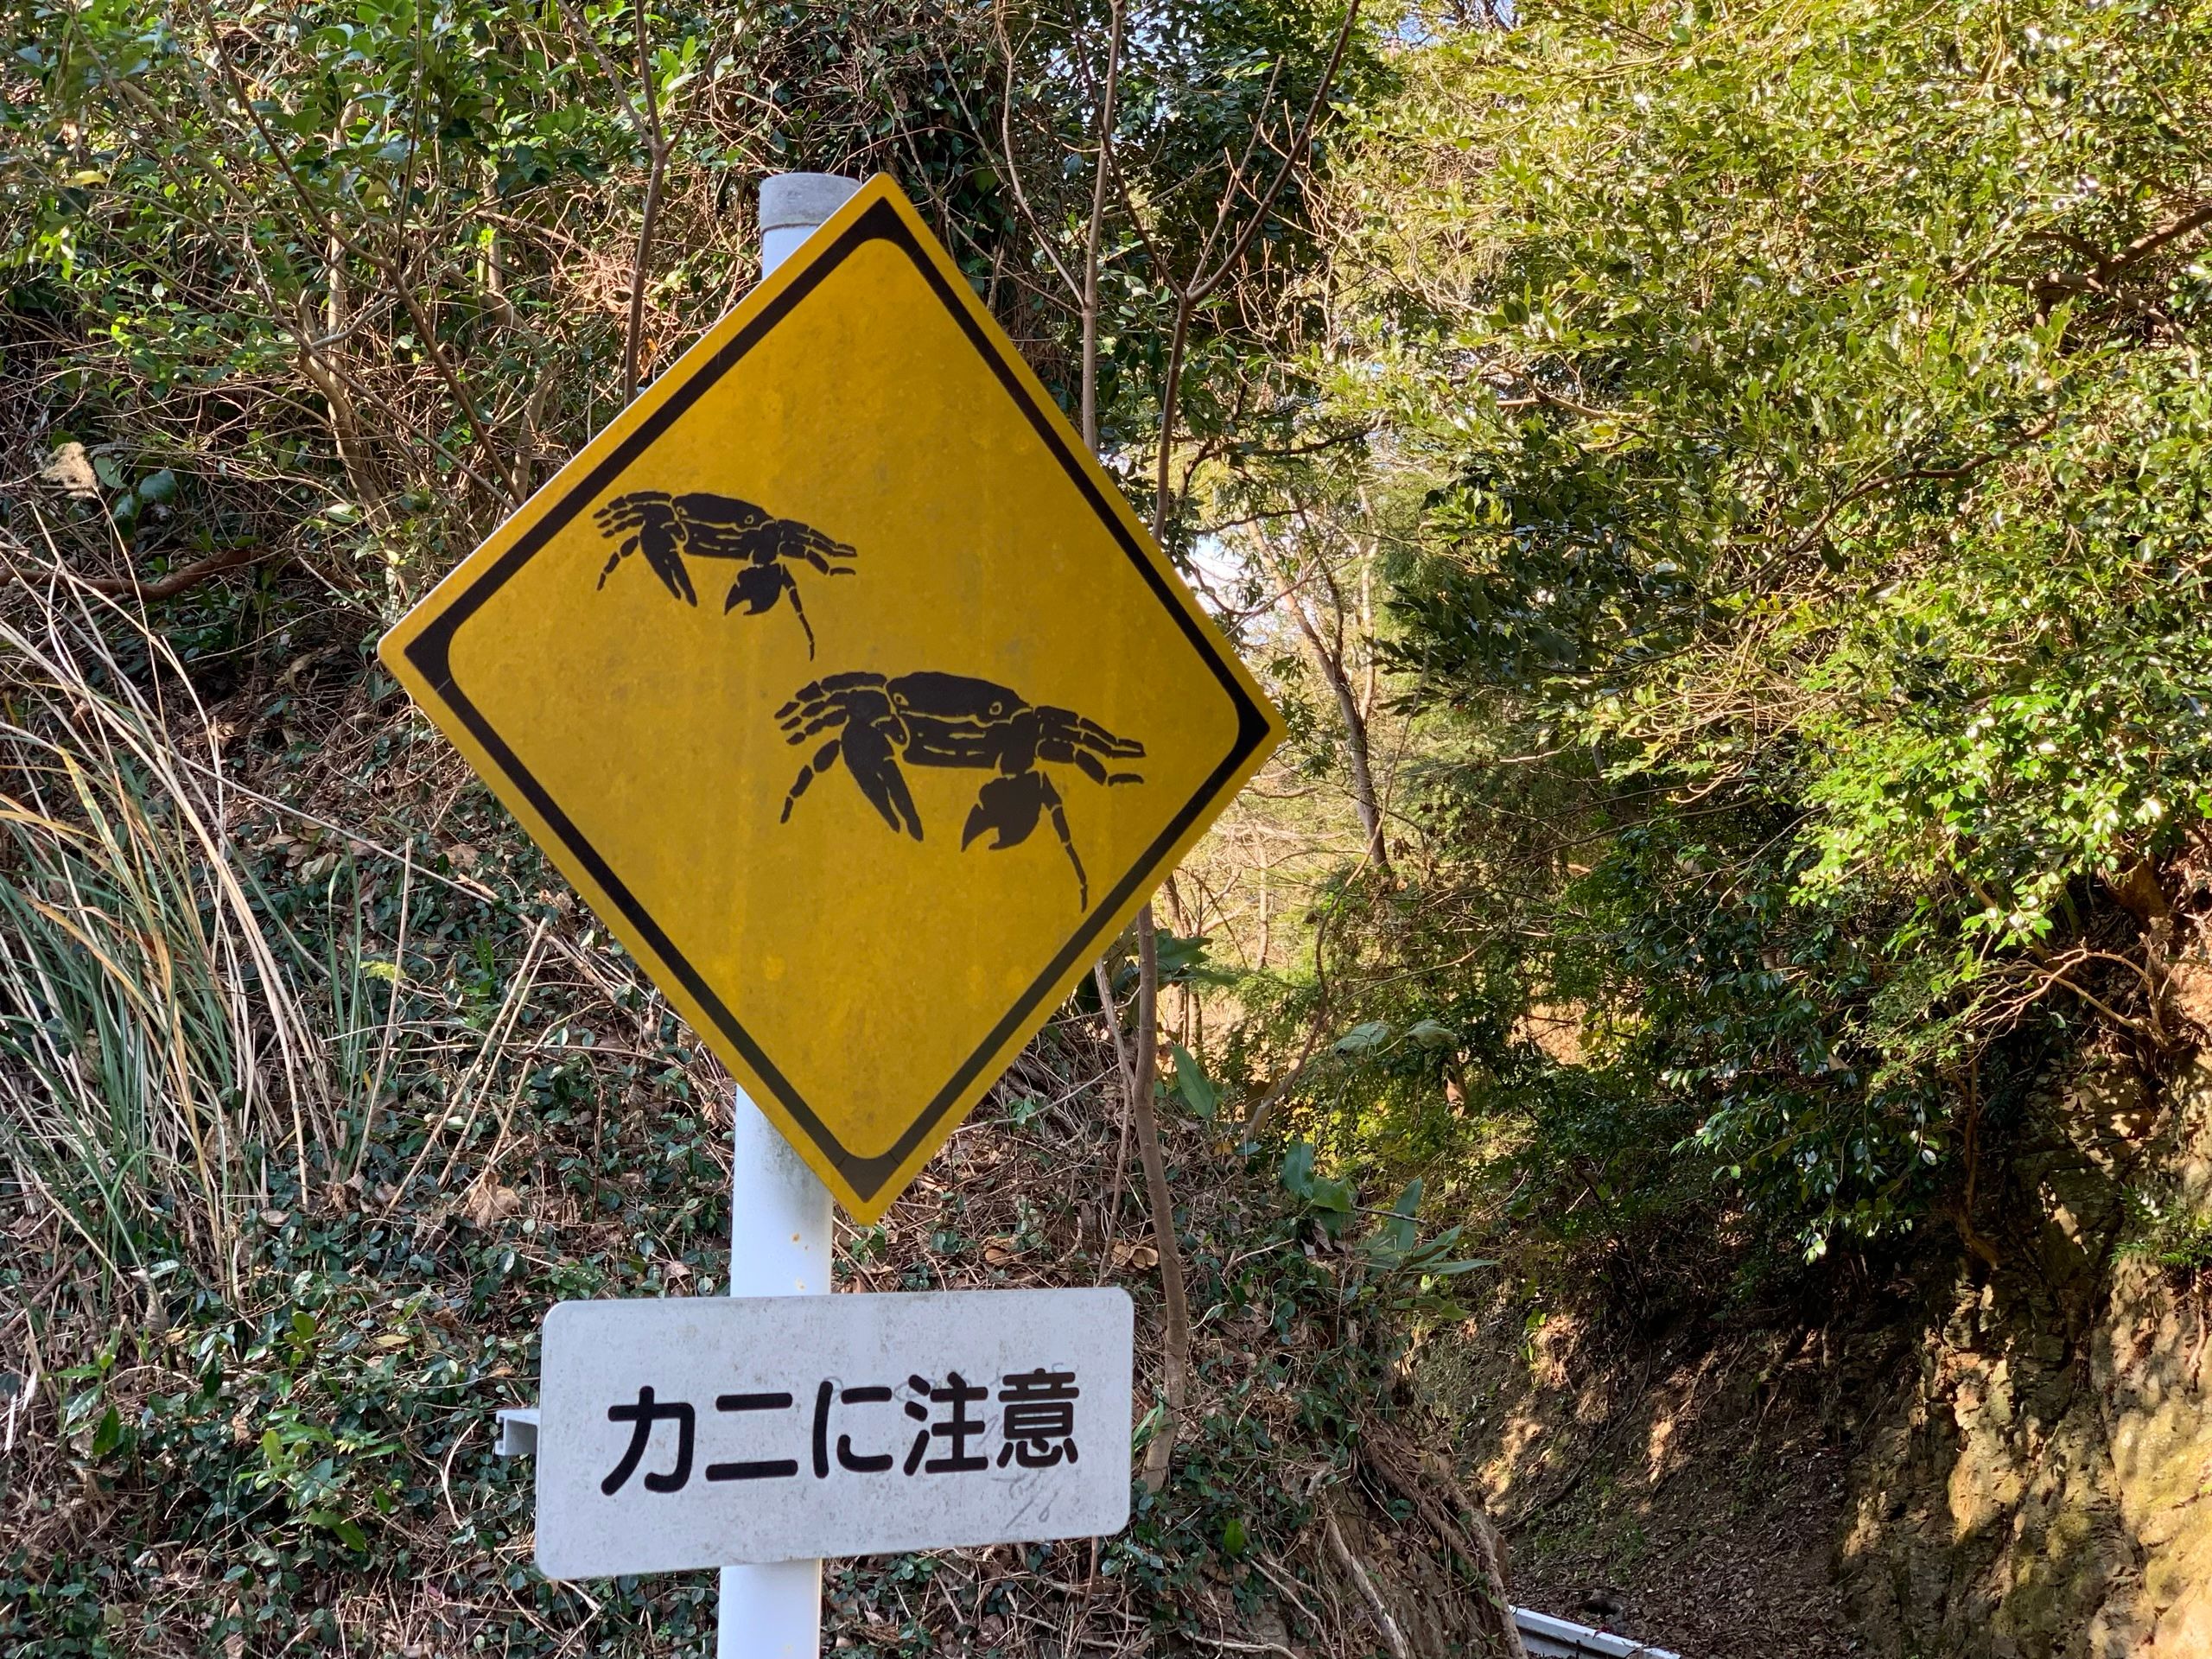 A road sign warns against crabs.